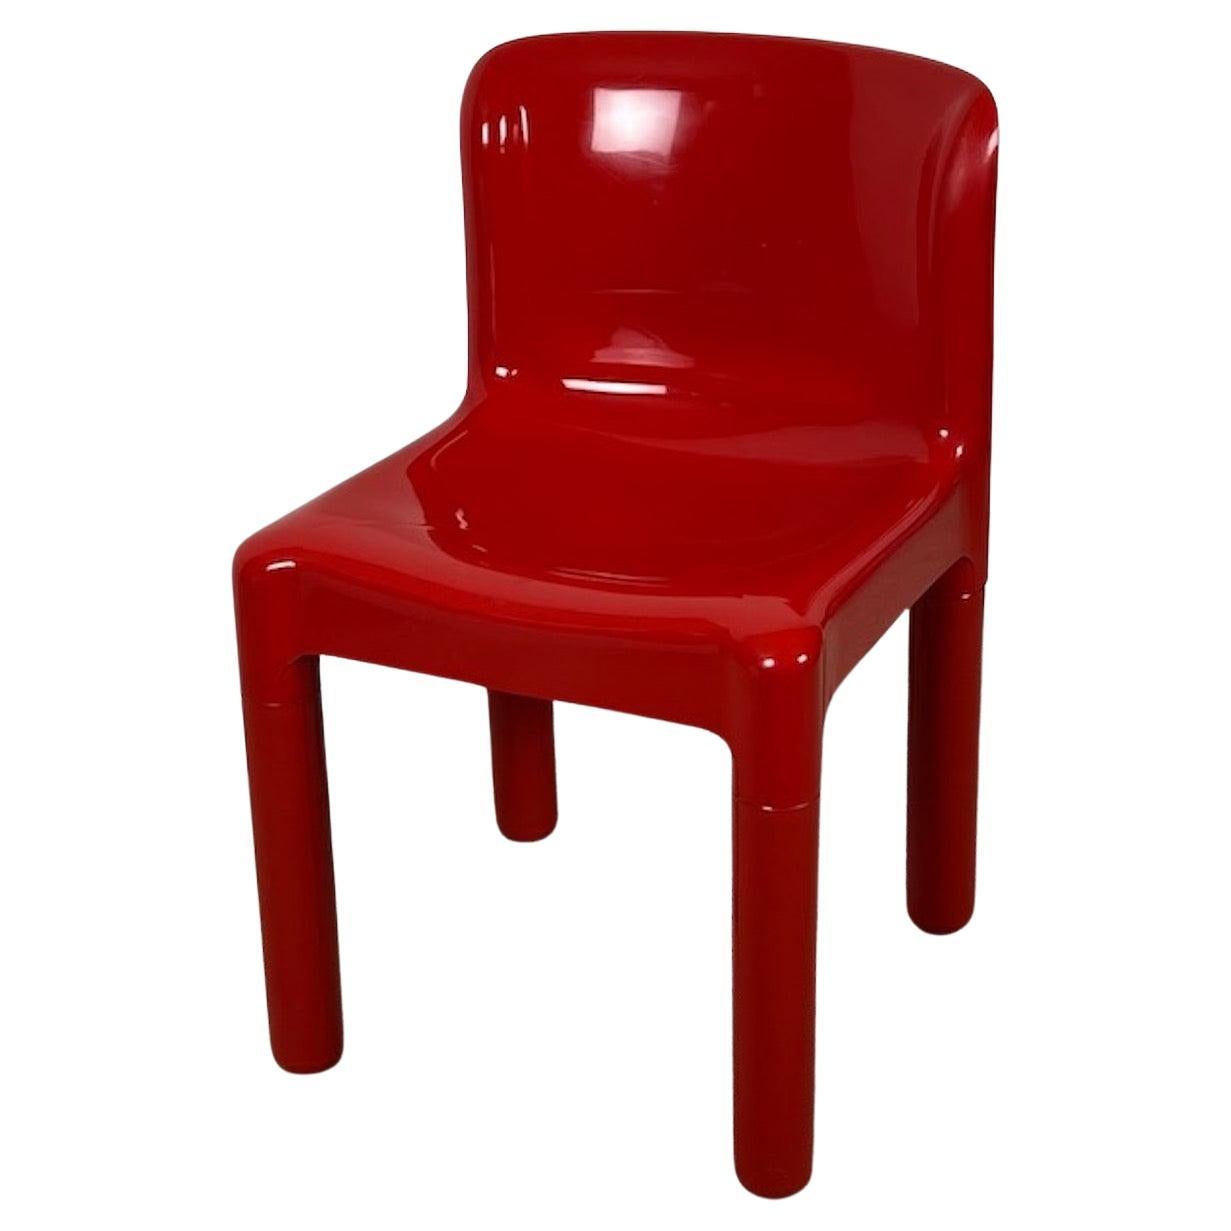 Kartell 4875 Chair by Carlo Bartoli in Glossy Red, 1980 Edition